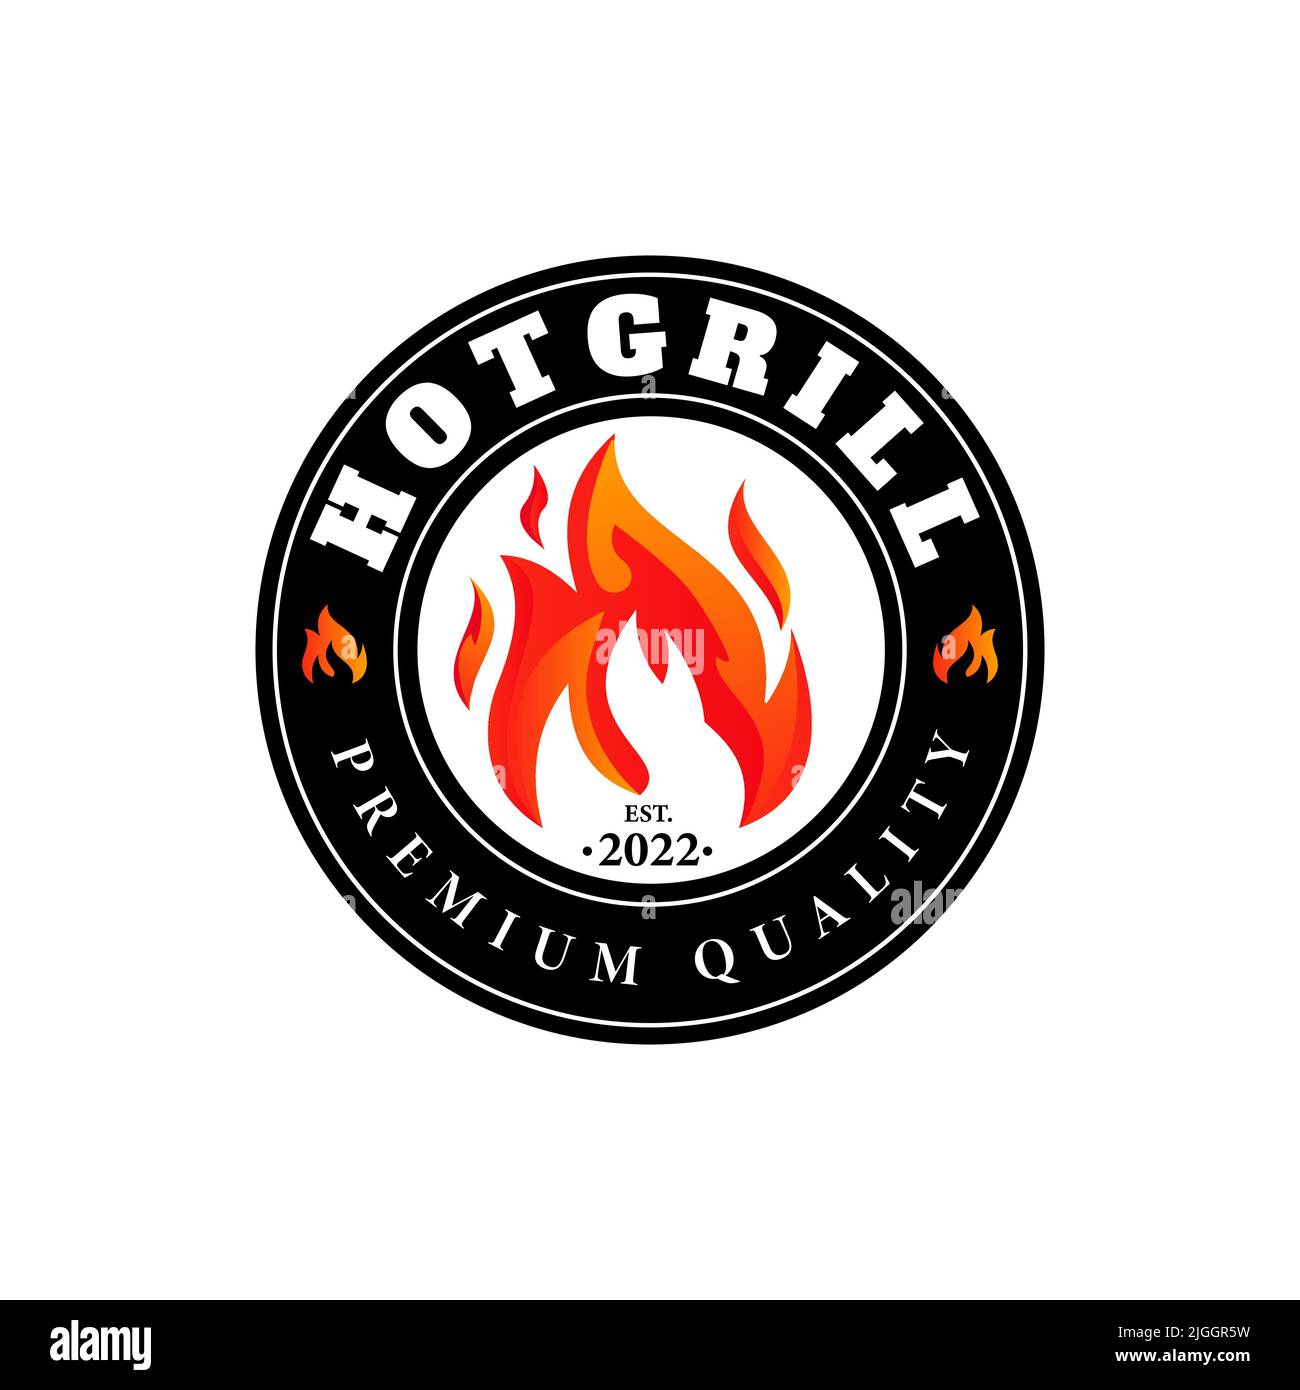 Hot grill emblem design logo, fire and restaurant icon, red fire icon Stock Vector